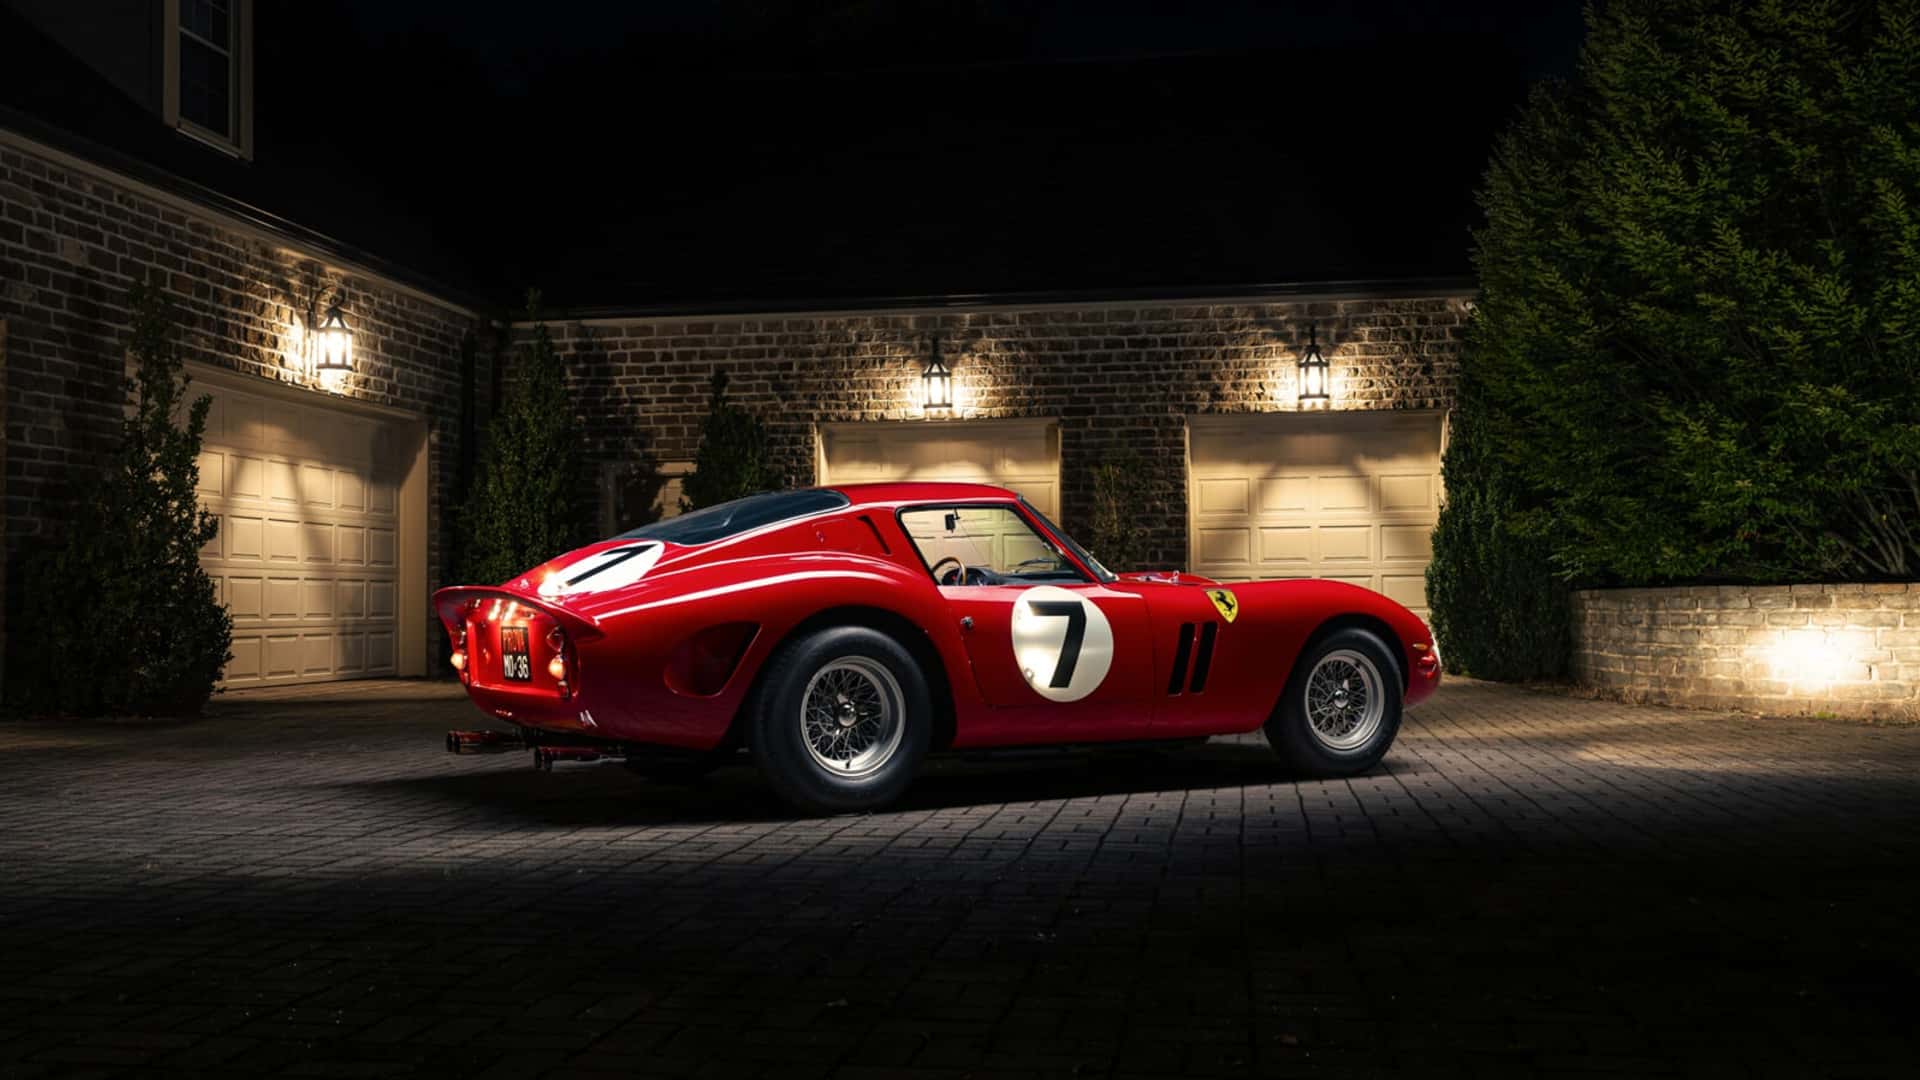 Photo: 1962 Ferrari GTO sells for $51.7M, most expensive car ever auctioned